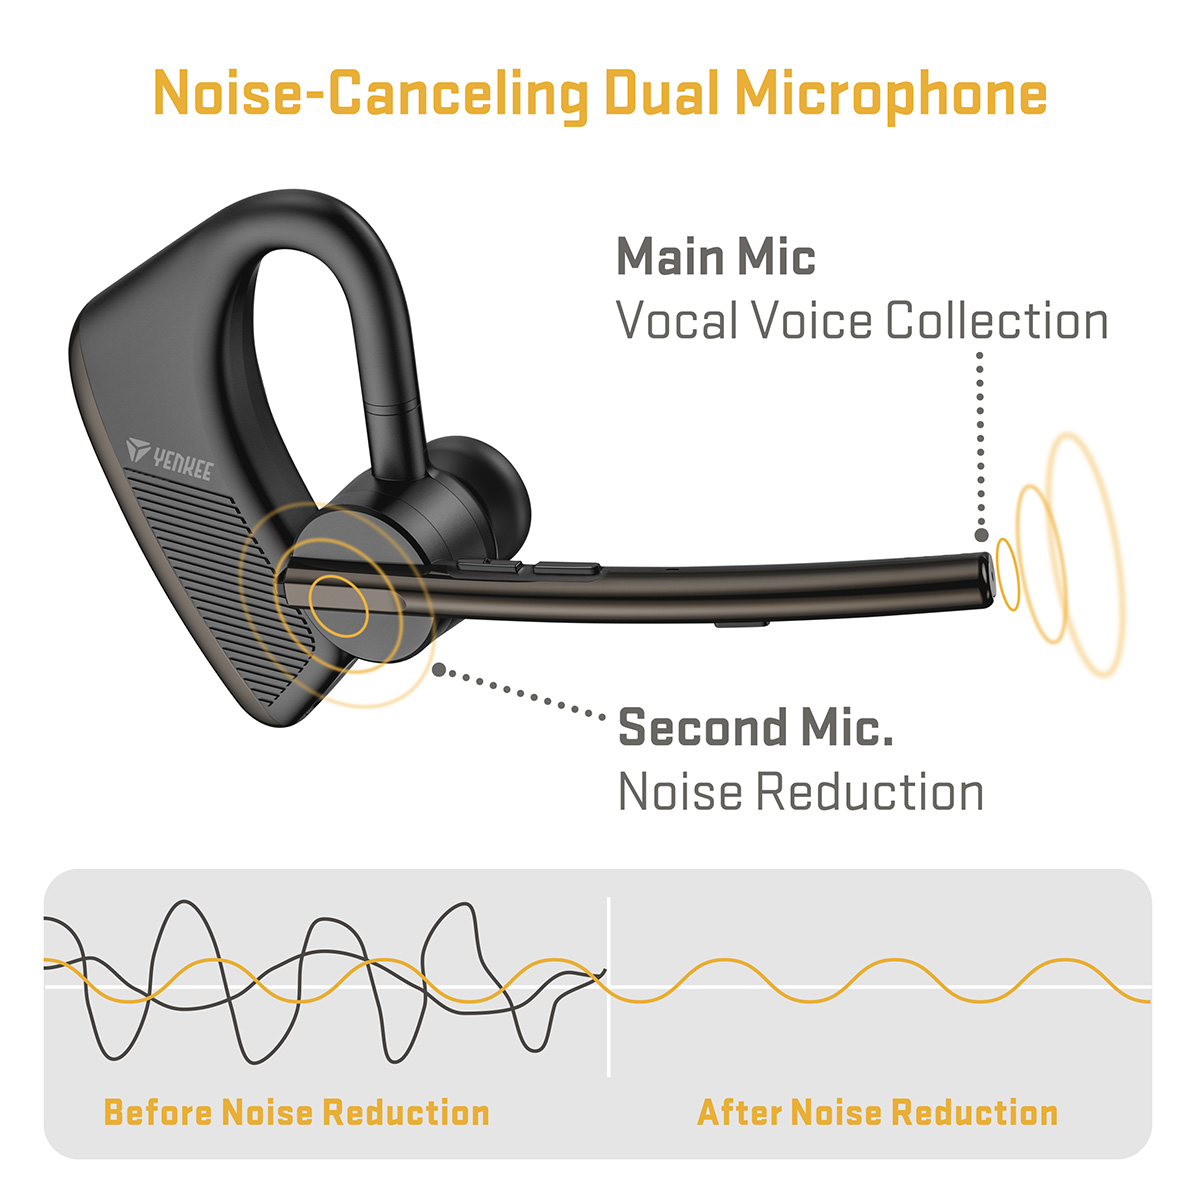 Noise-canceling dual microphone